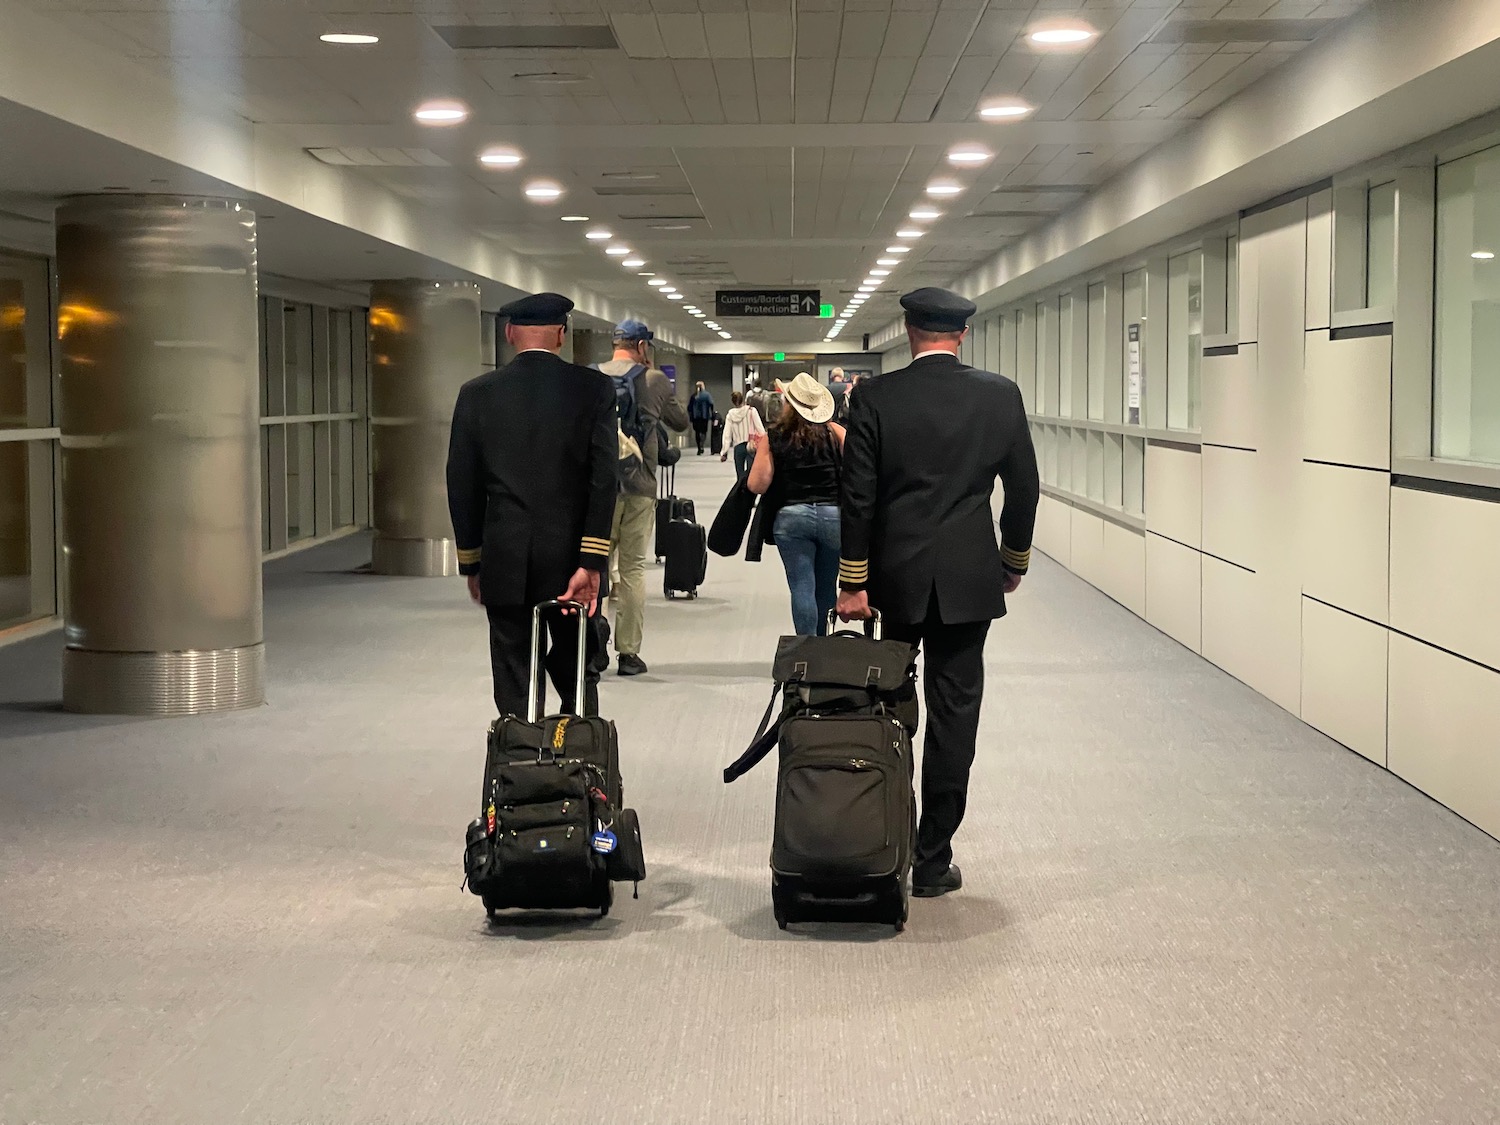 a group of people in uniform with luggage